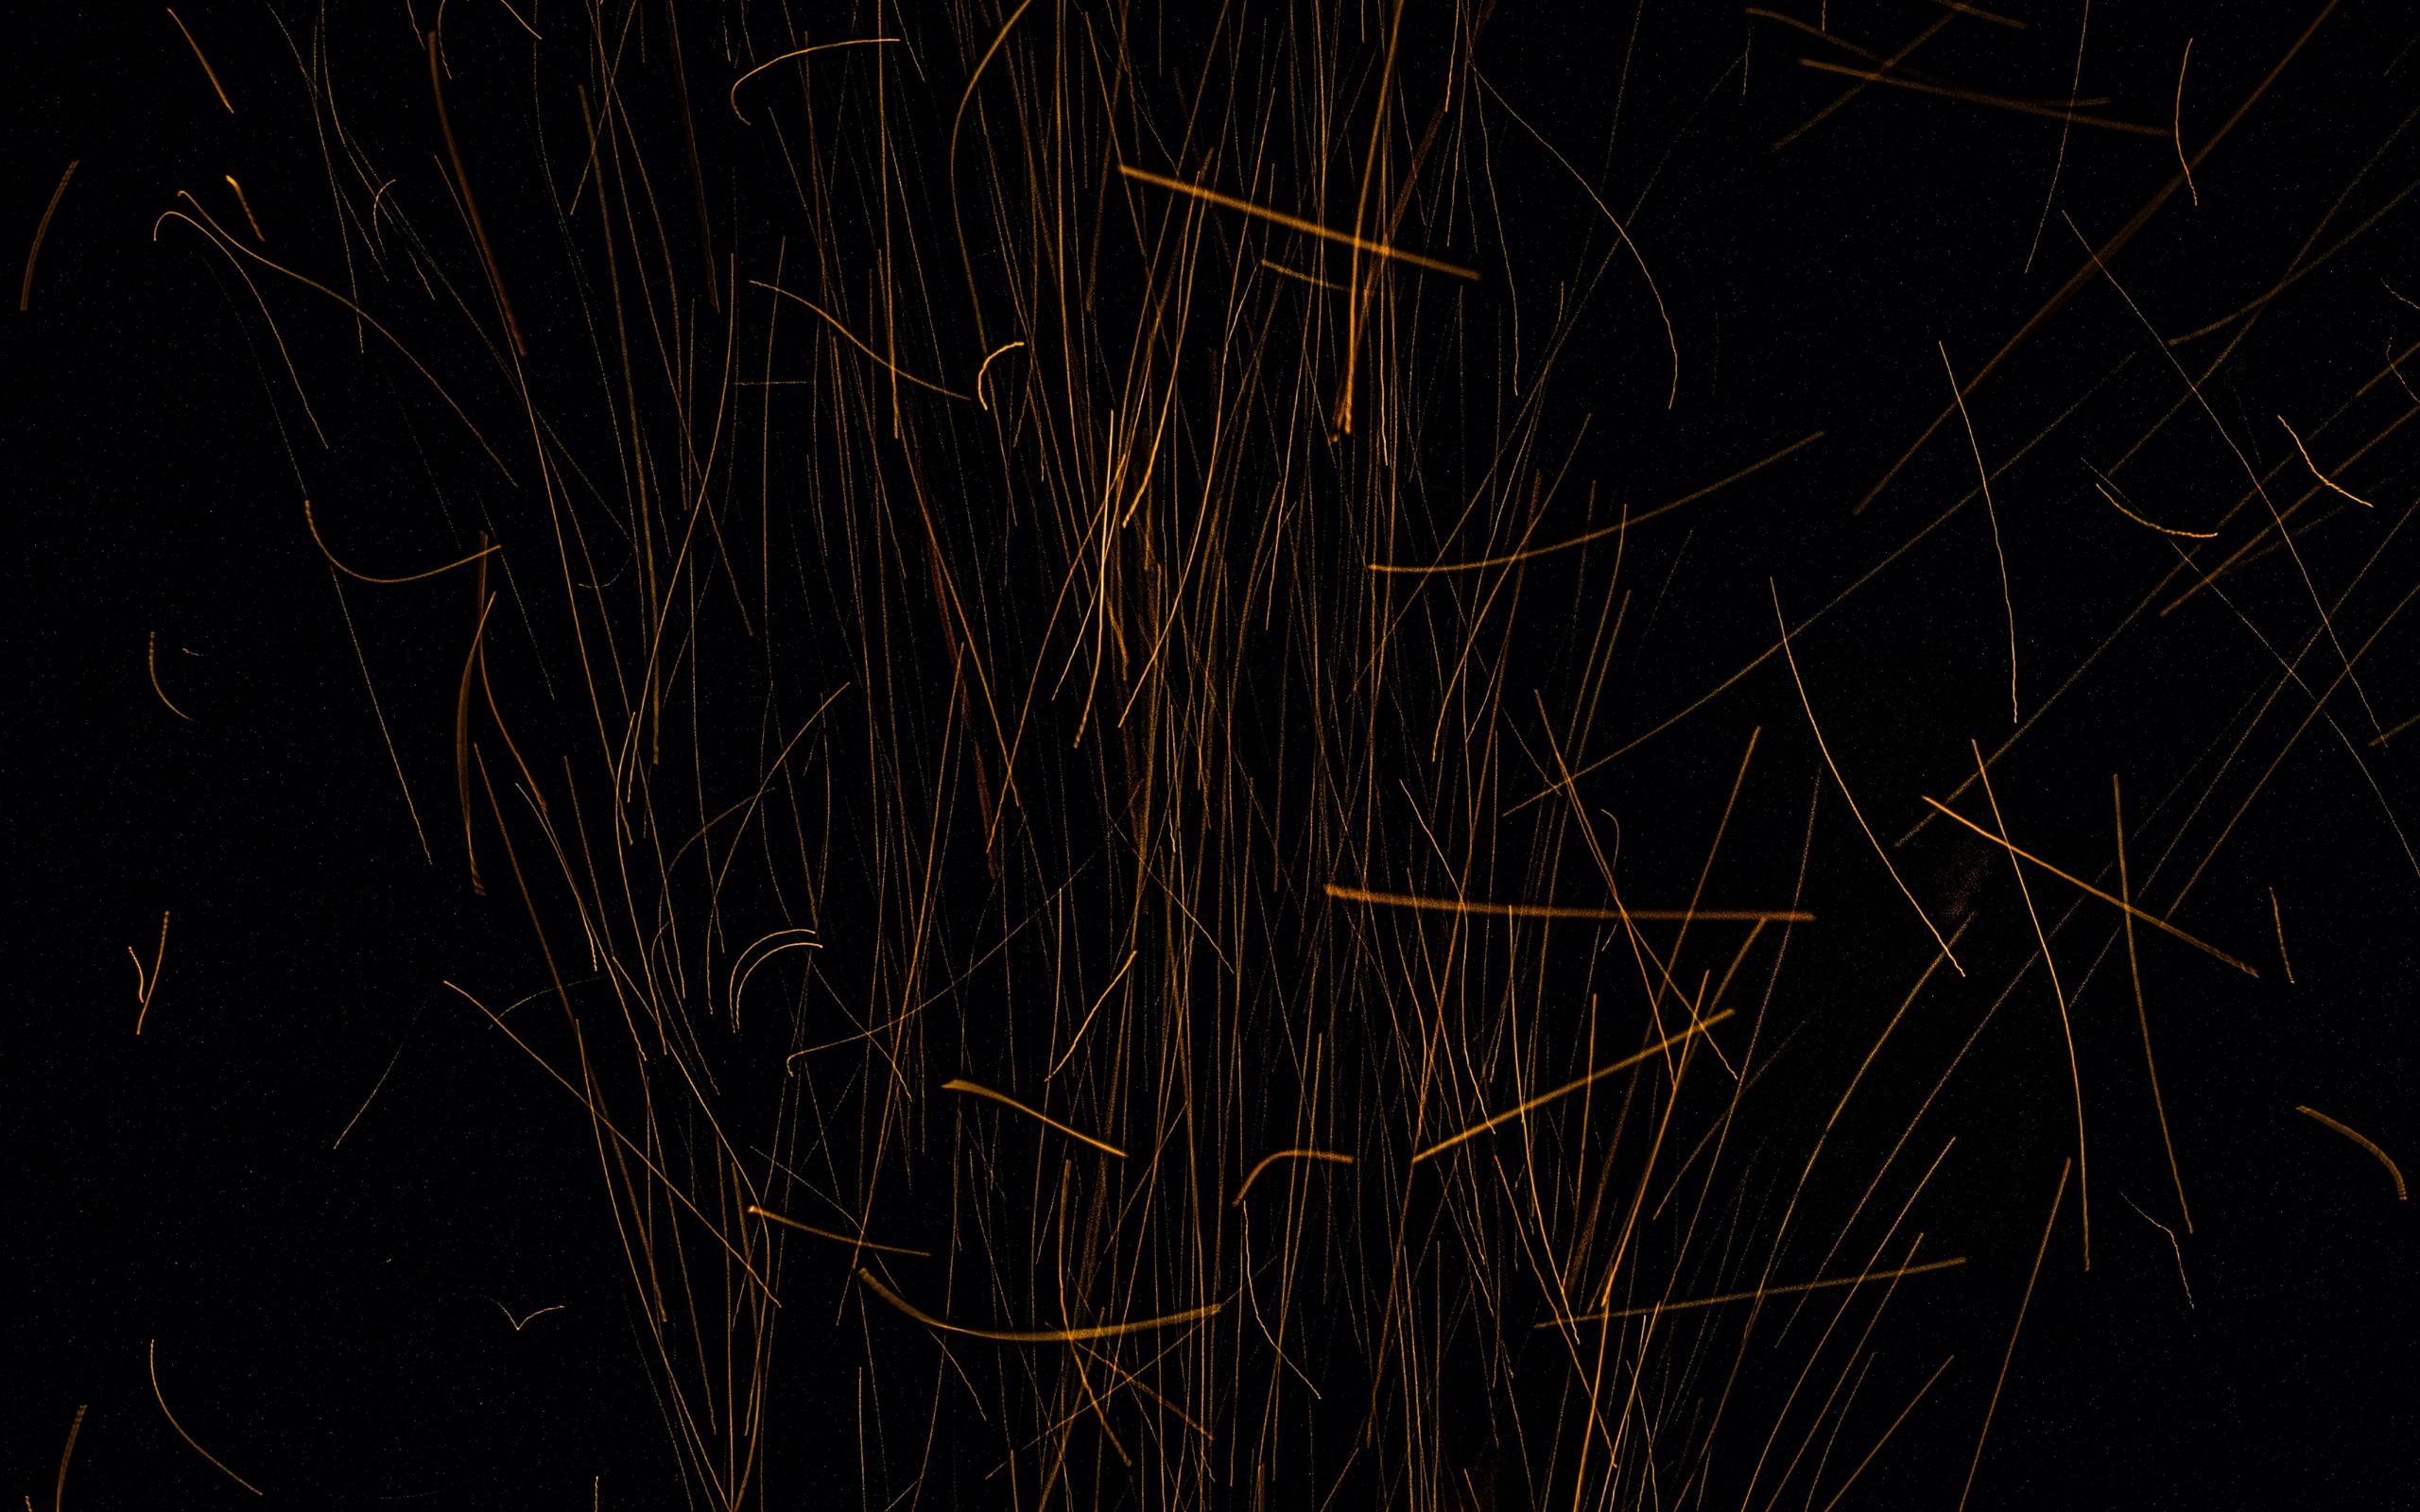 Download wallpaper 2560x1600 sparks, lines, stripes, gold, black widescreen 16:10 HD background